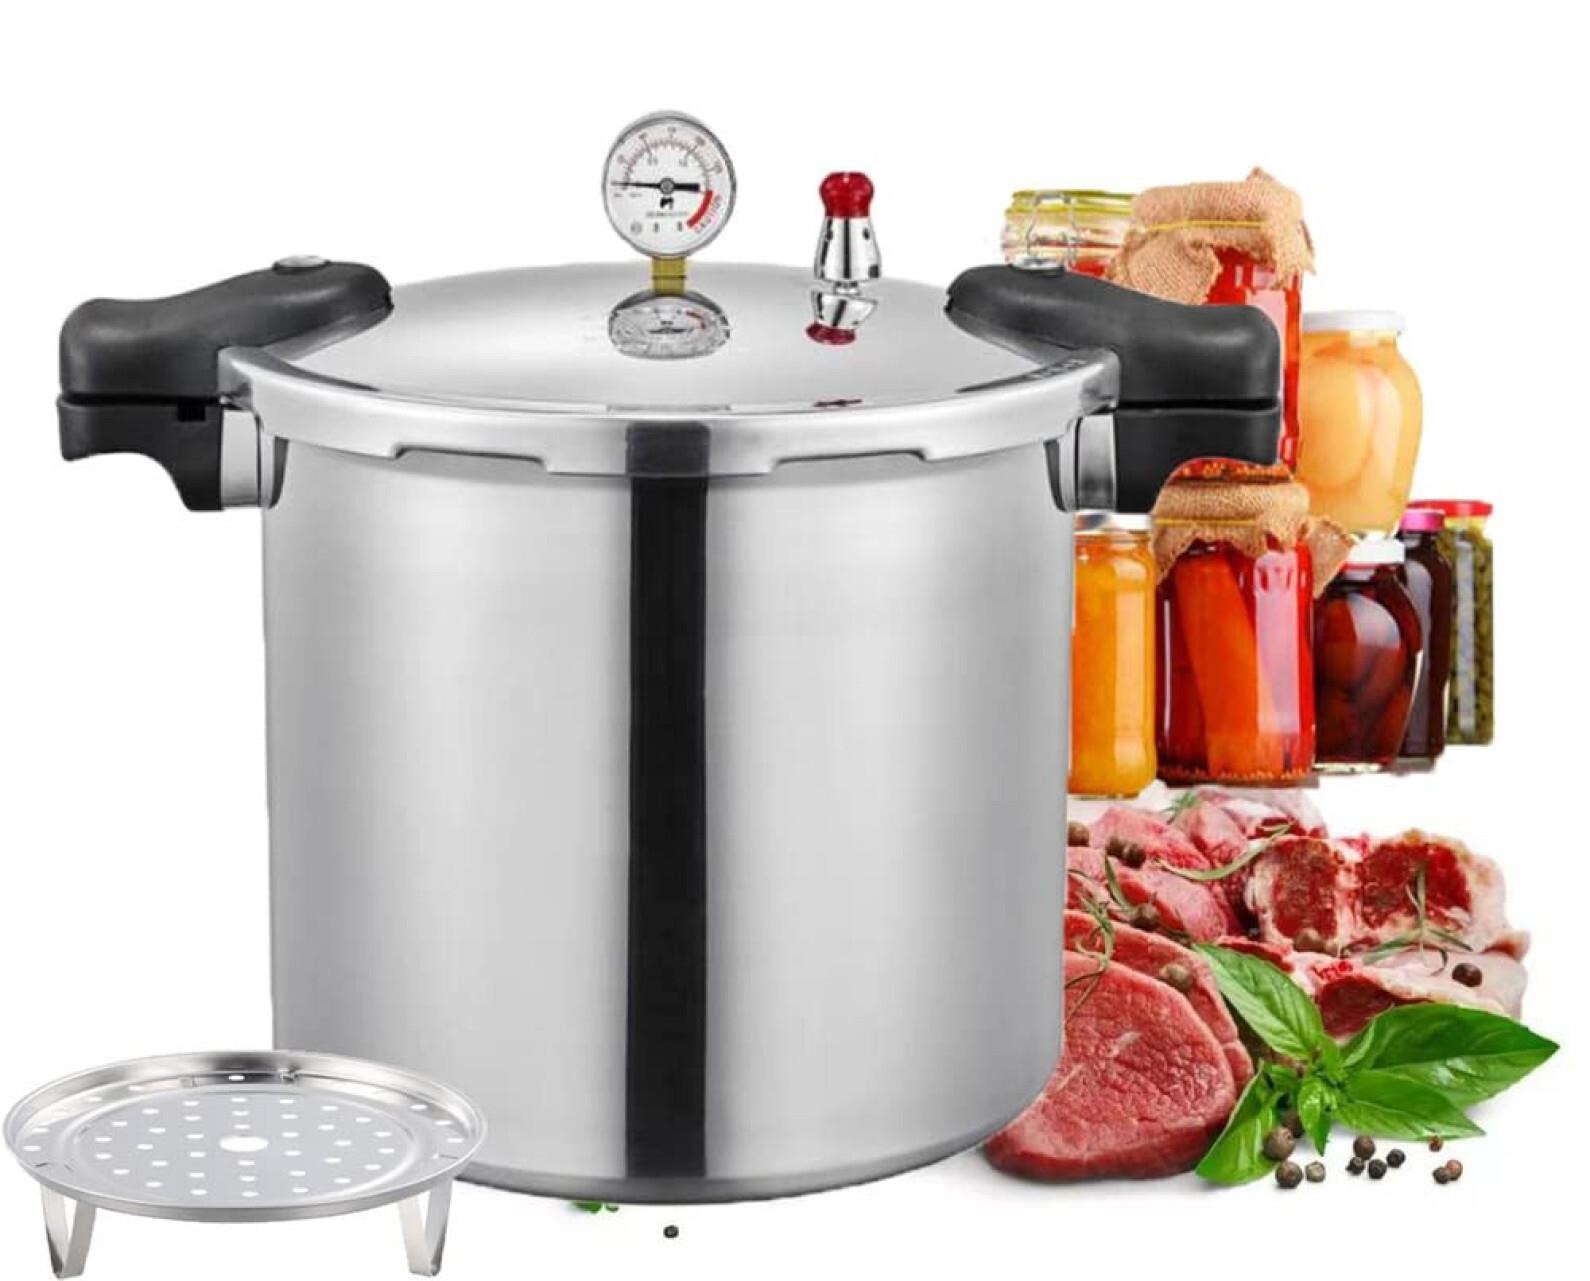 25quart pressure canner cooker and cooker with coo